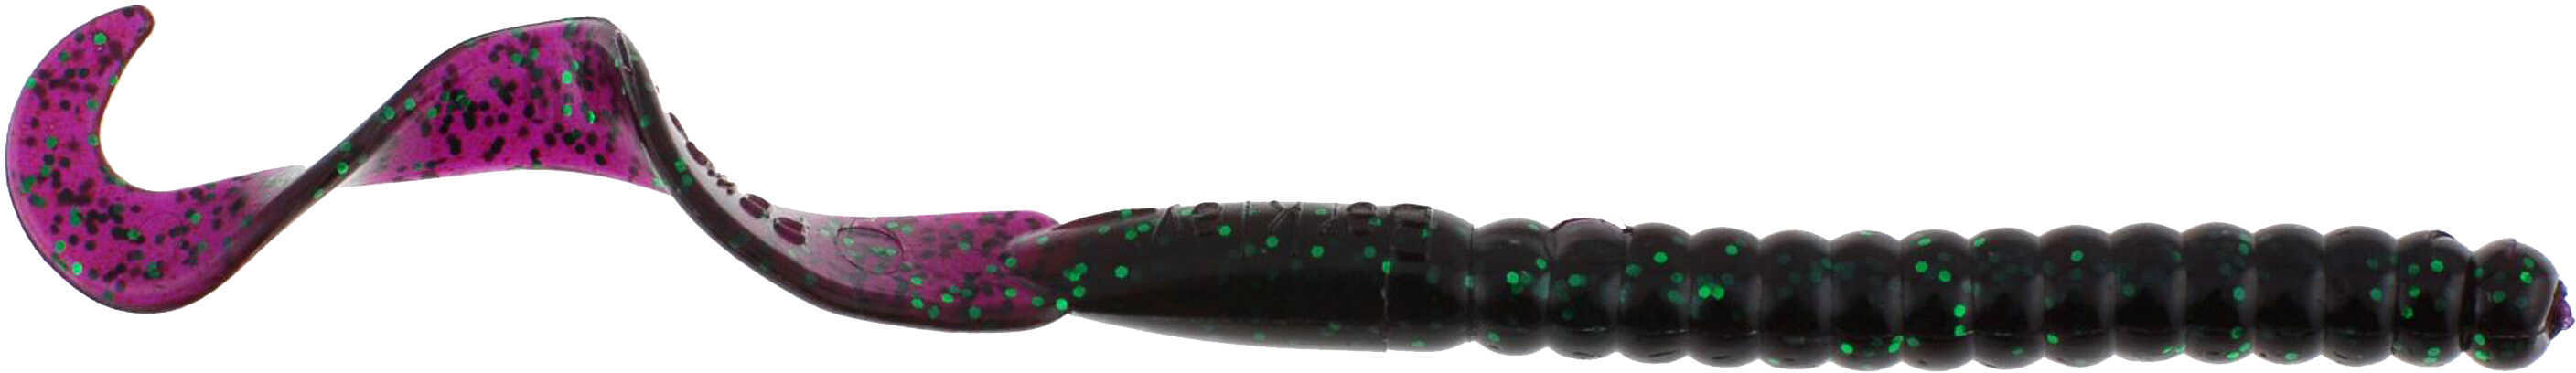 PWRBAIT WORMS 7" JUNE BUG 13PK